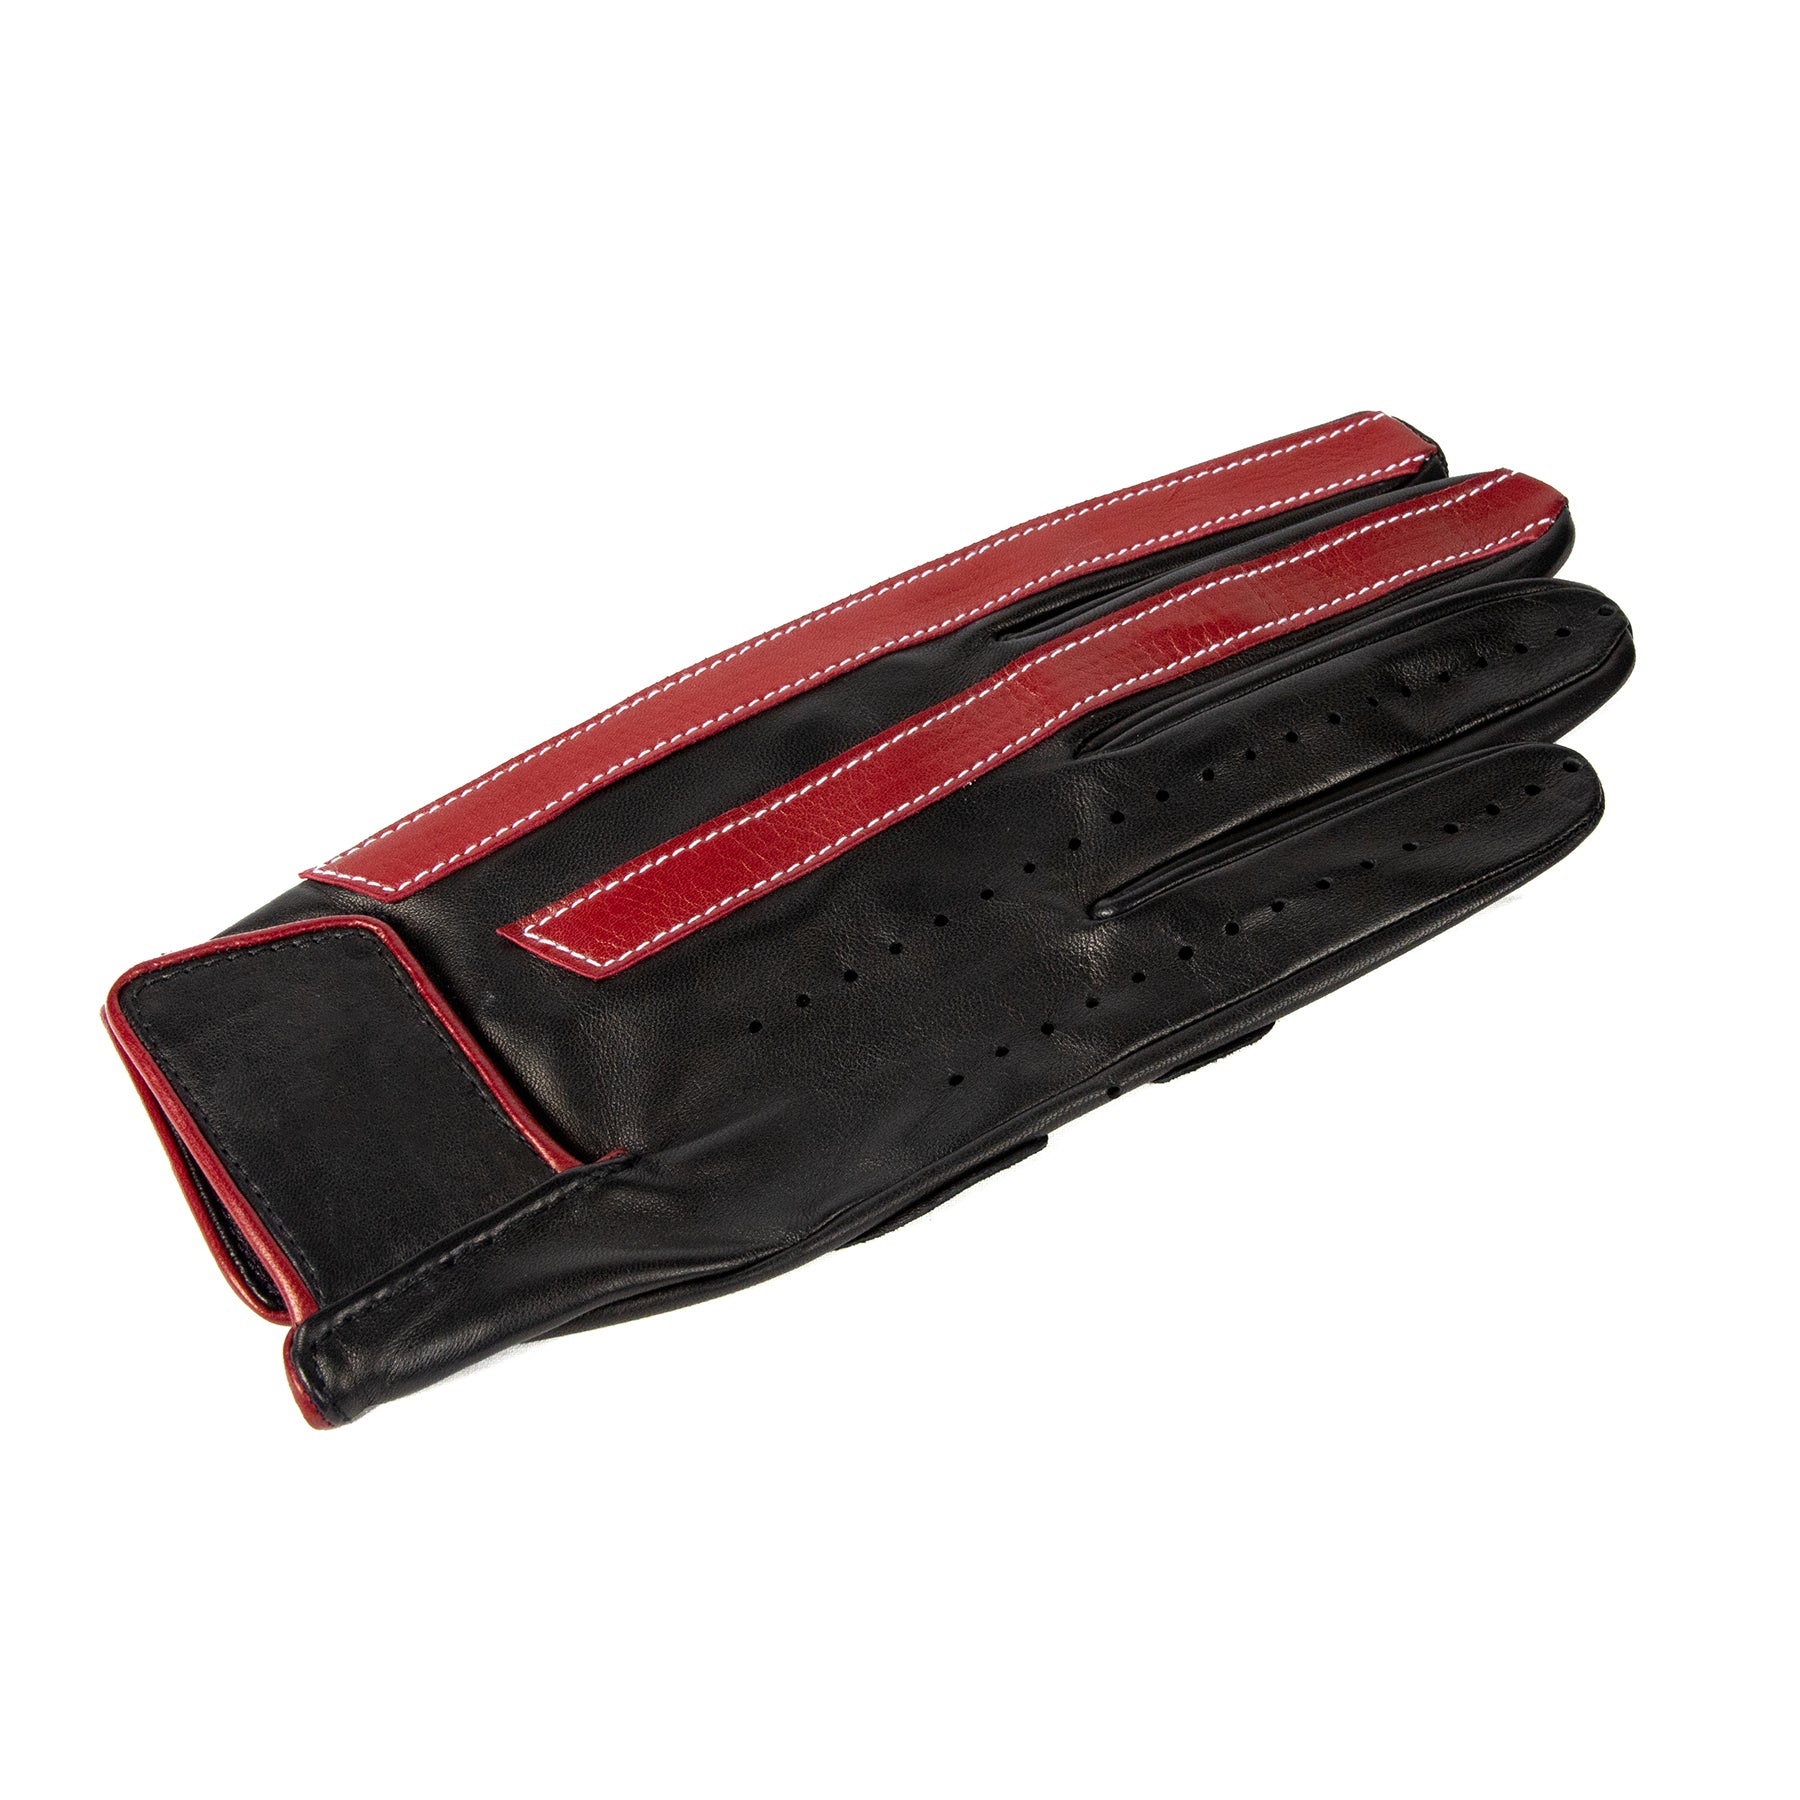 Men's unlined driving gloves in black nappa leather with red leather strips